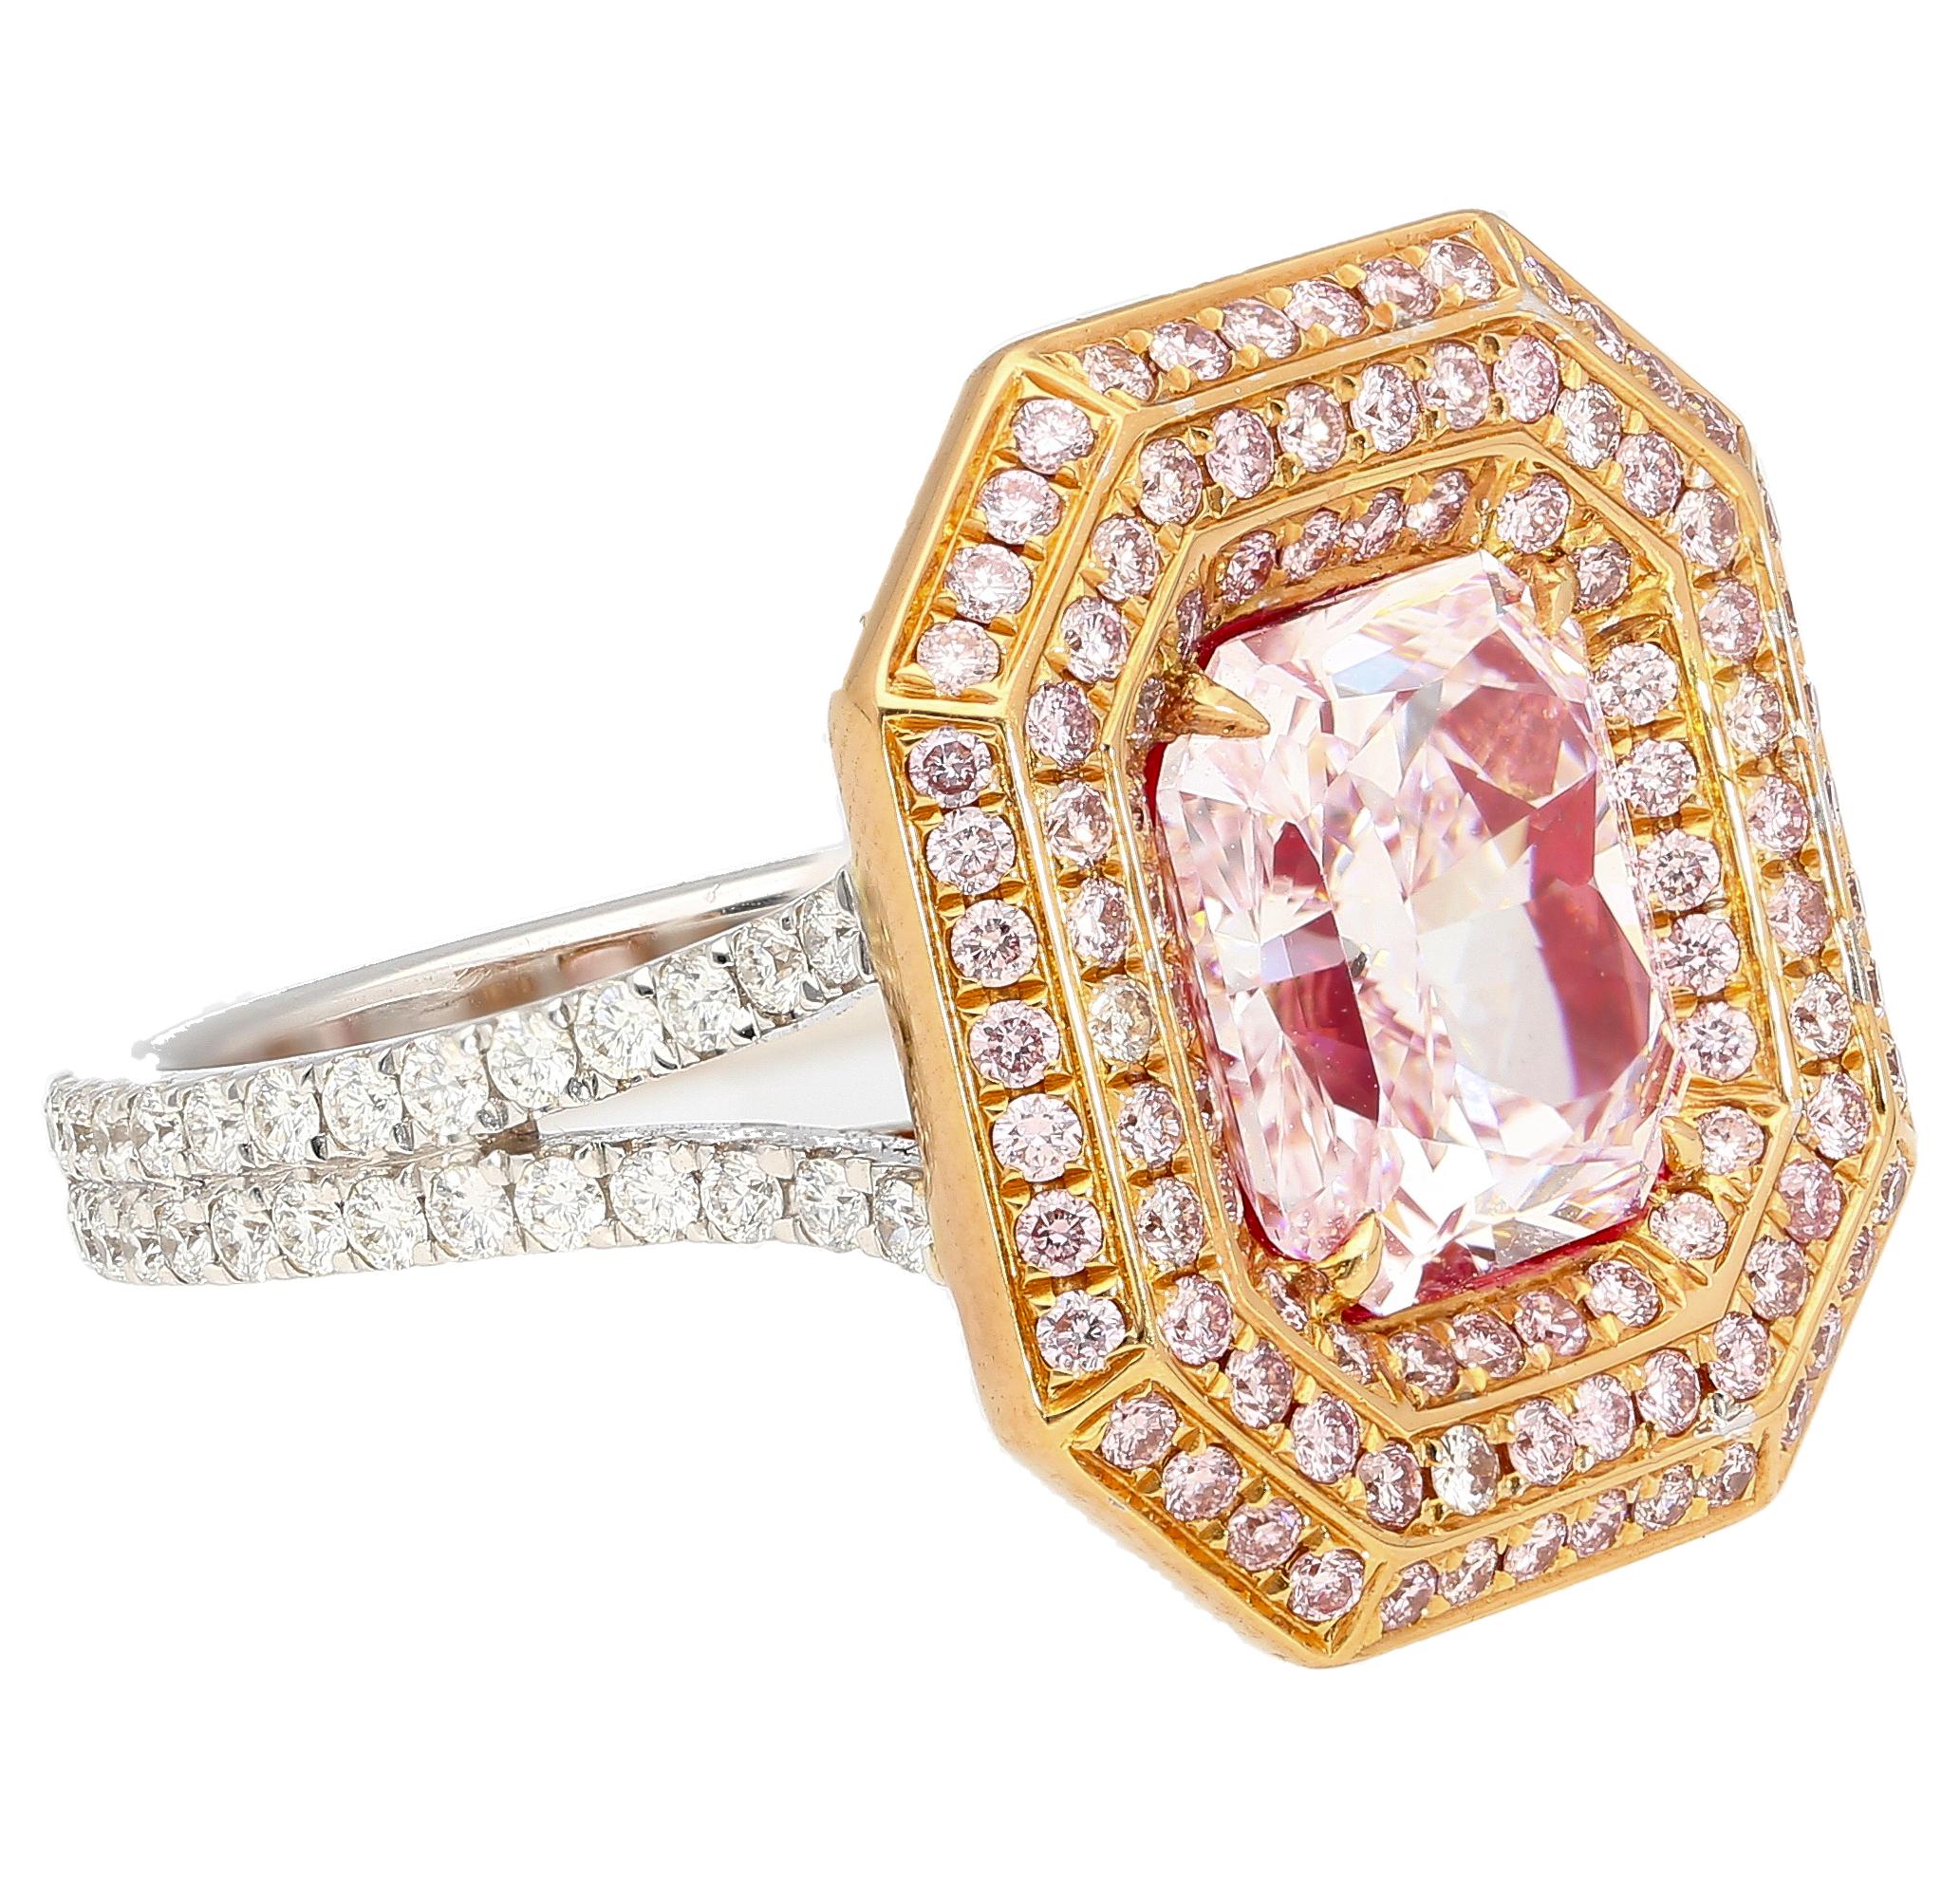 GIA Certified 3.48 Carat Radiant Cut Fancy Light Pink Diamond Ring in 18k  In New Condition For Sale In Miami, FL